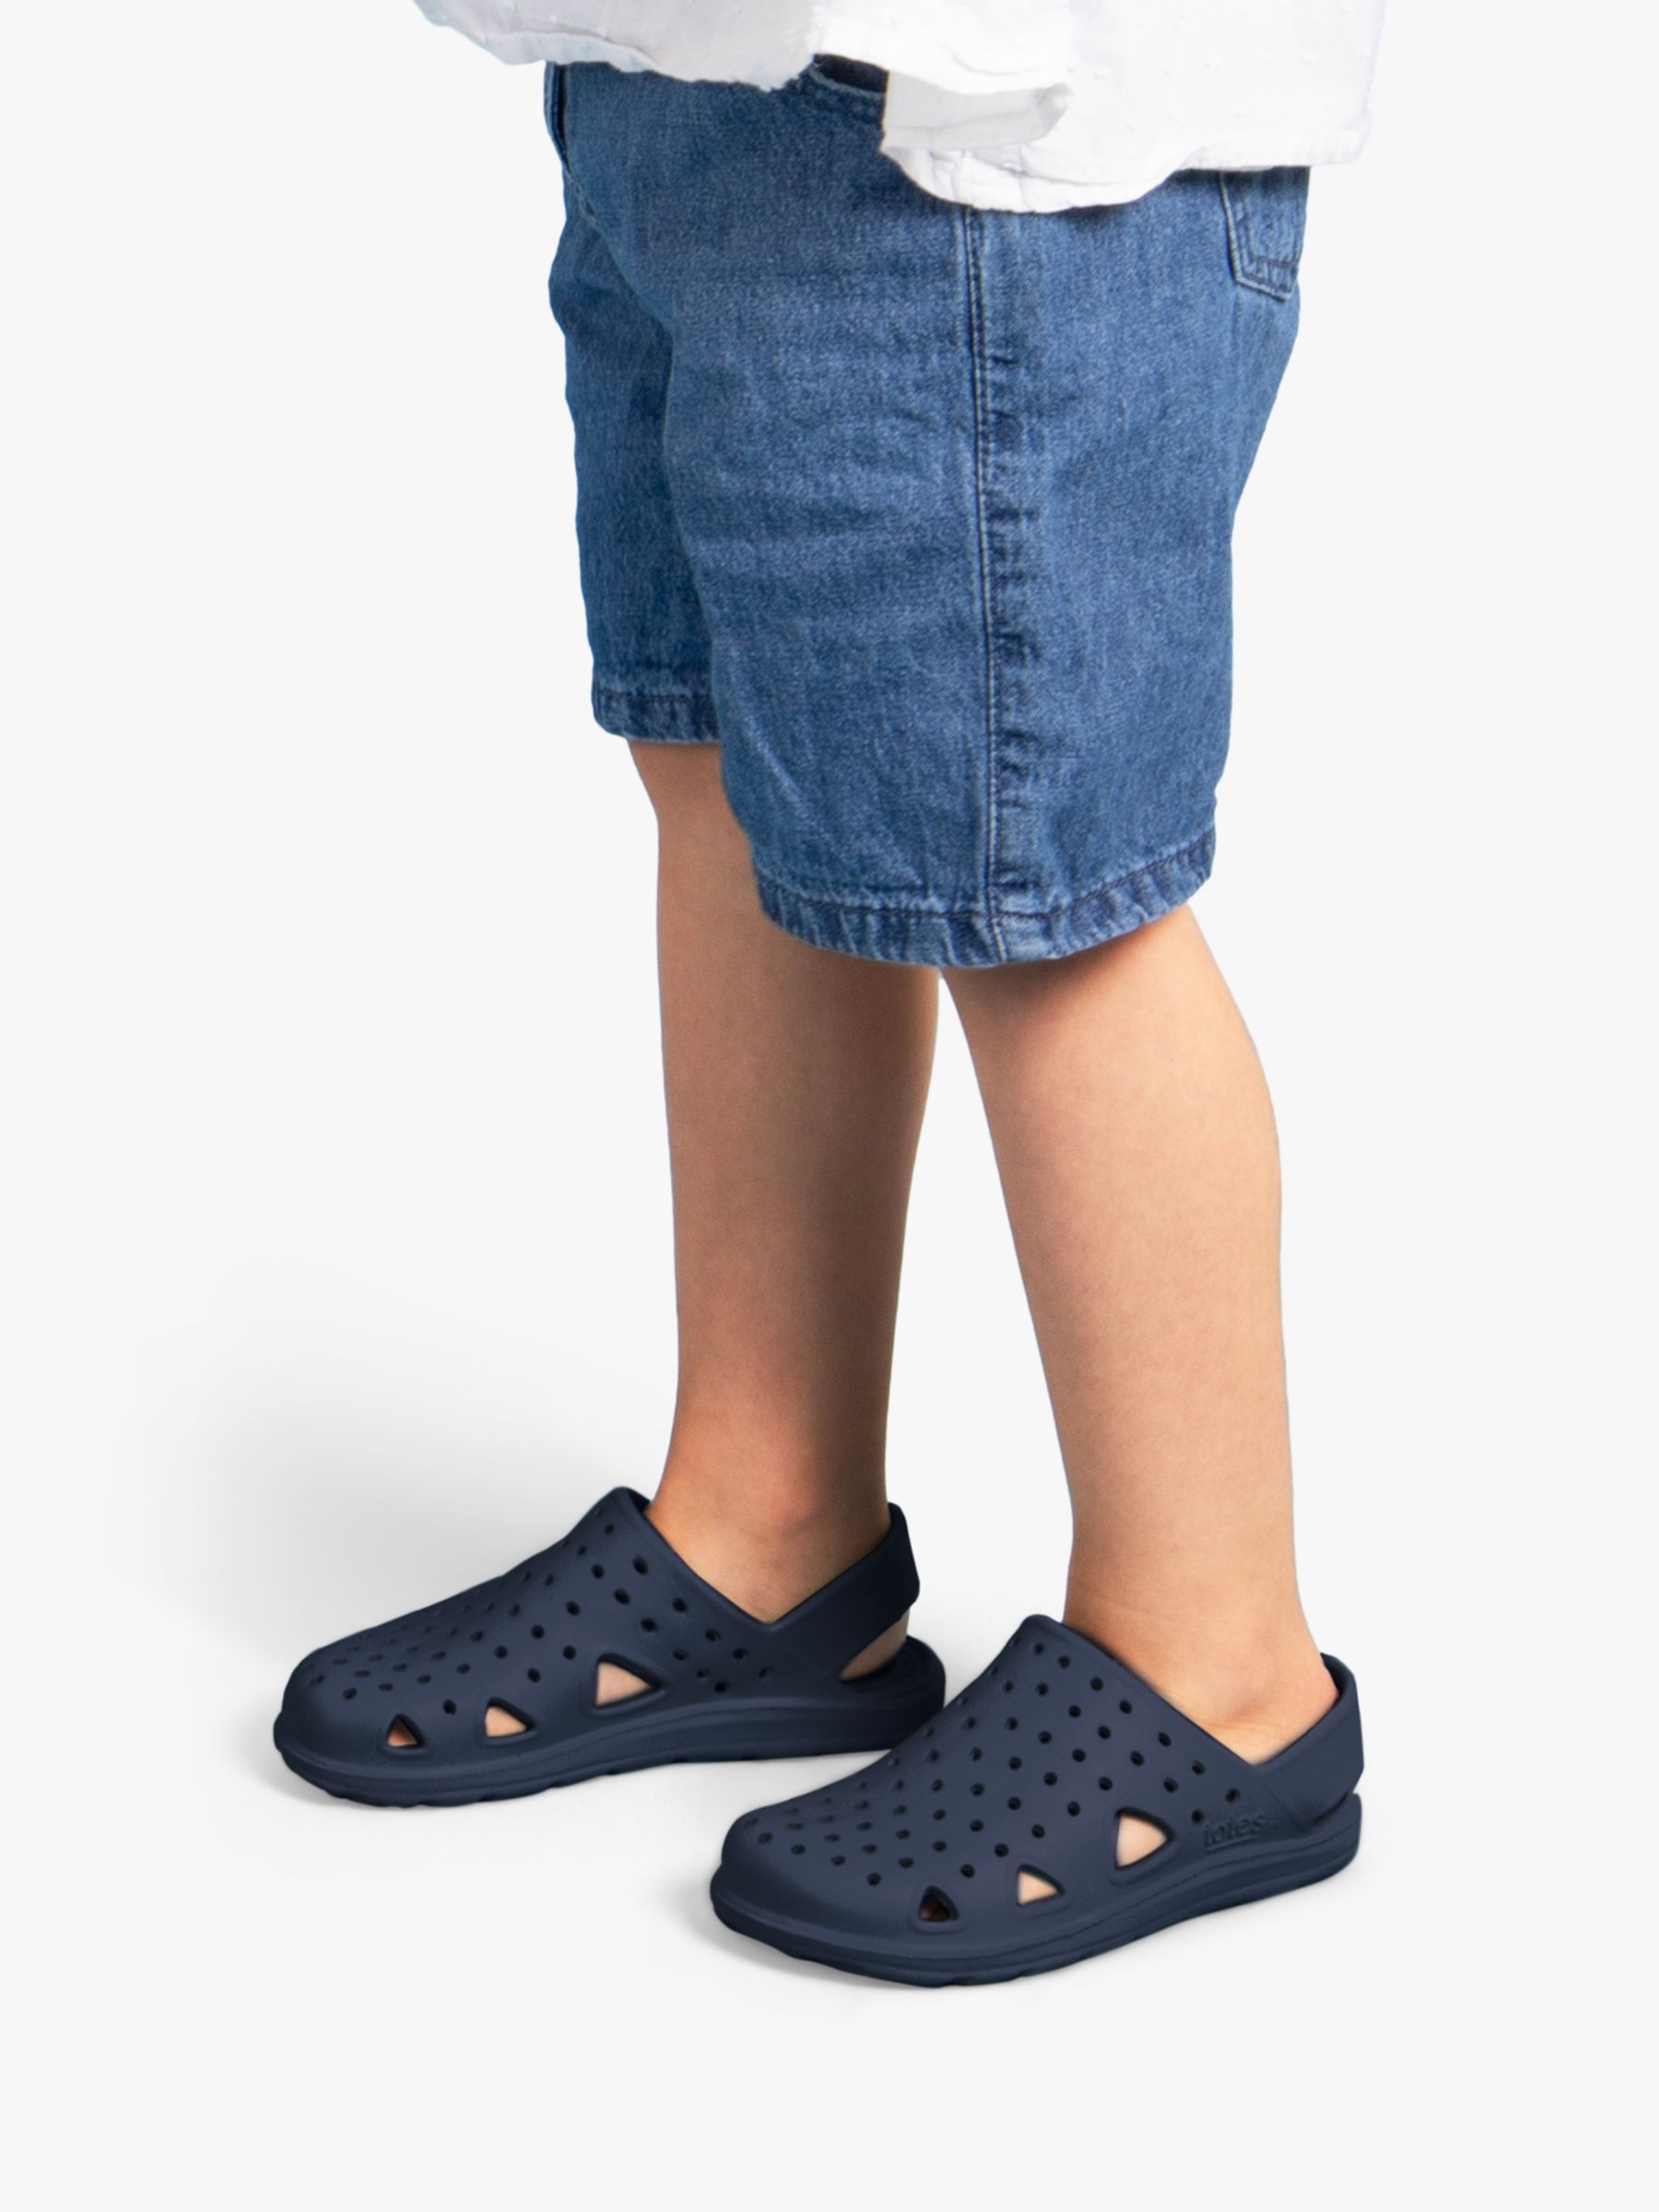 totes Kids' Solbounce Clogs, Navy, 2-3